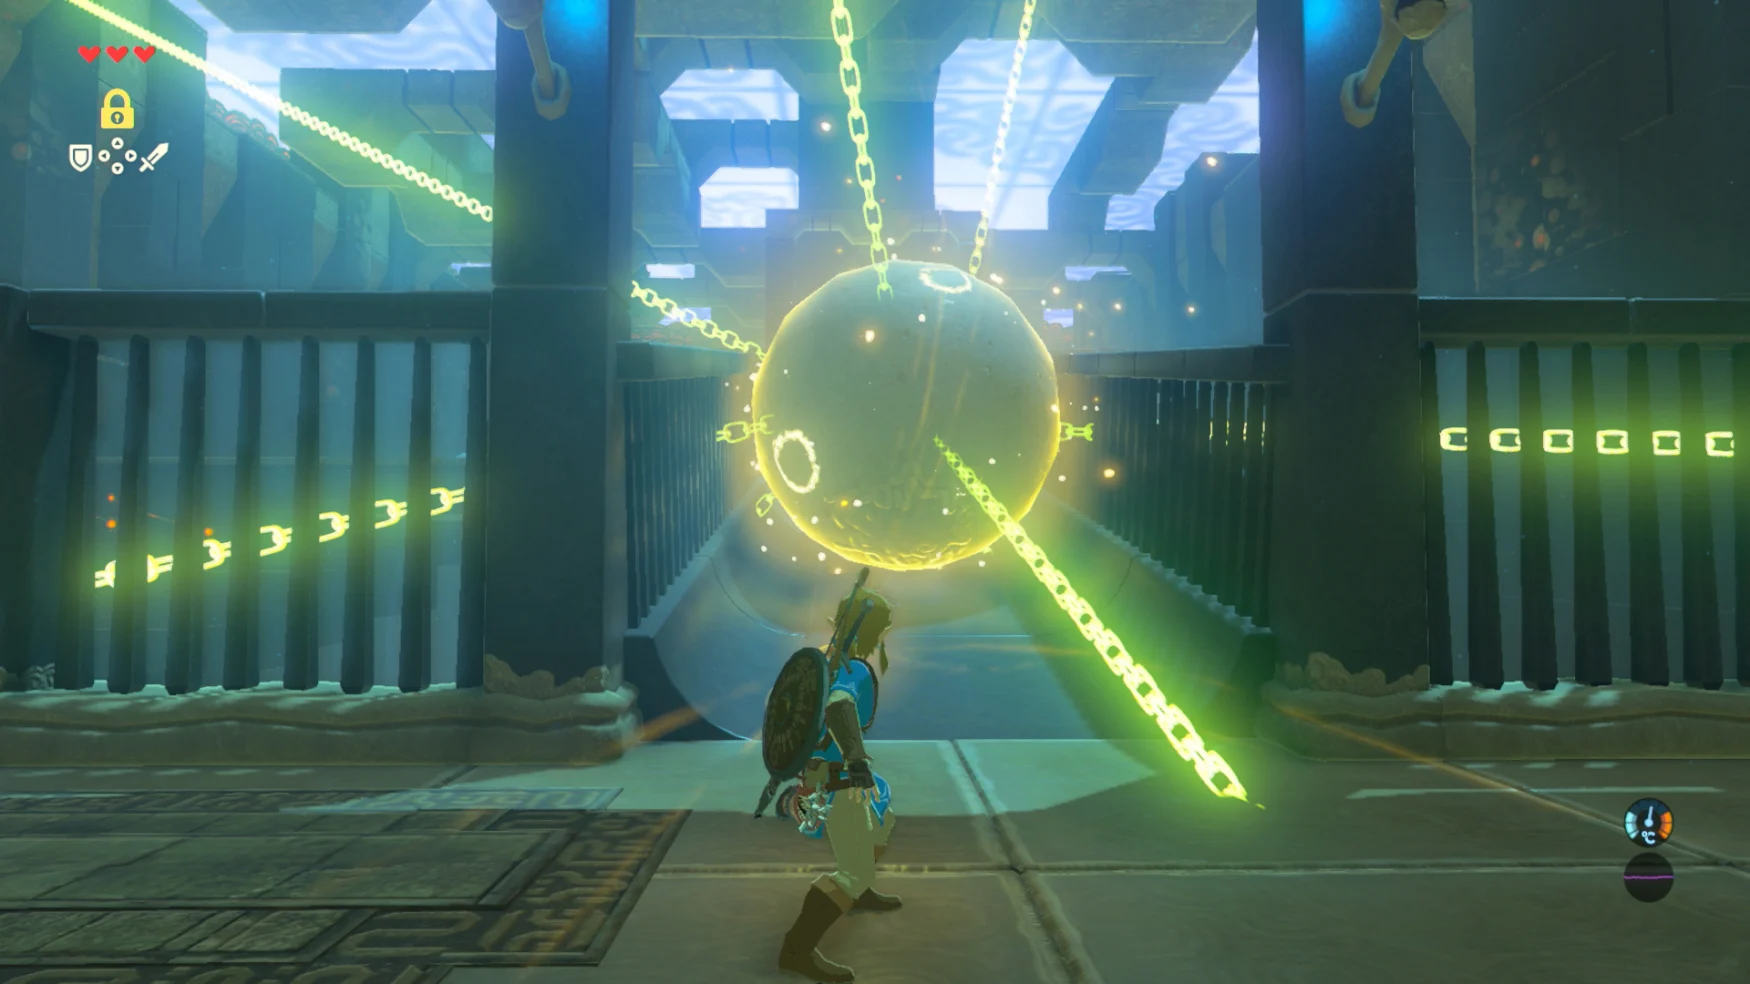 Image of Link using Stasis power in 'Breath of the Wild' 